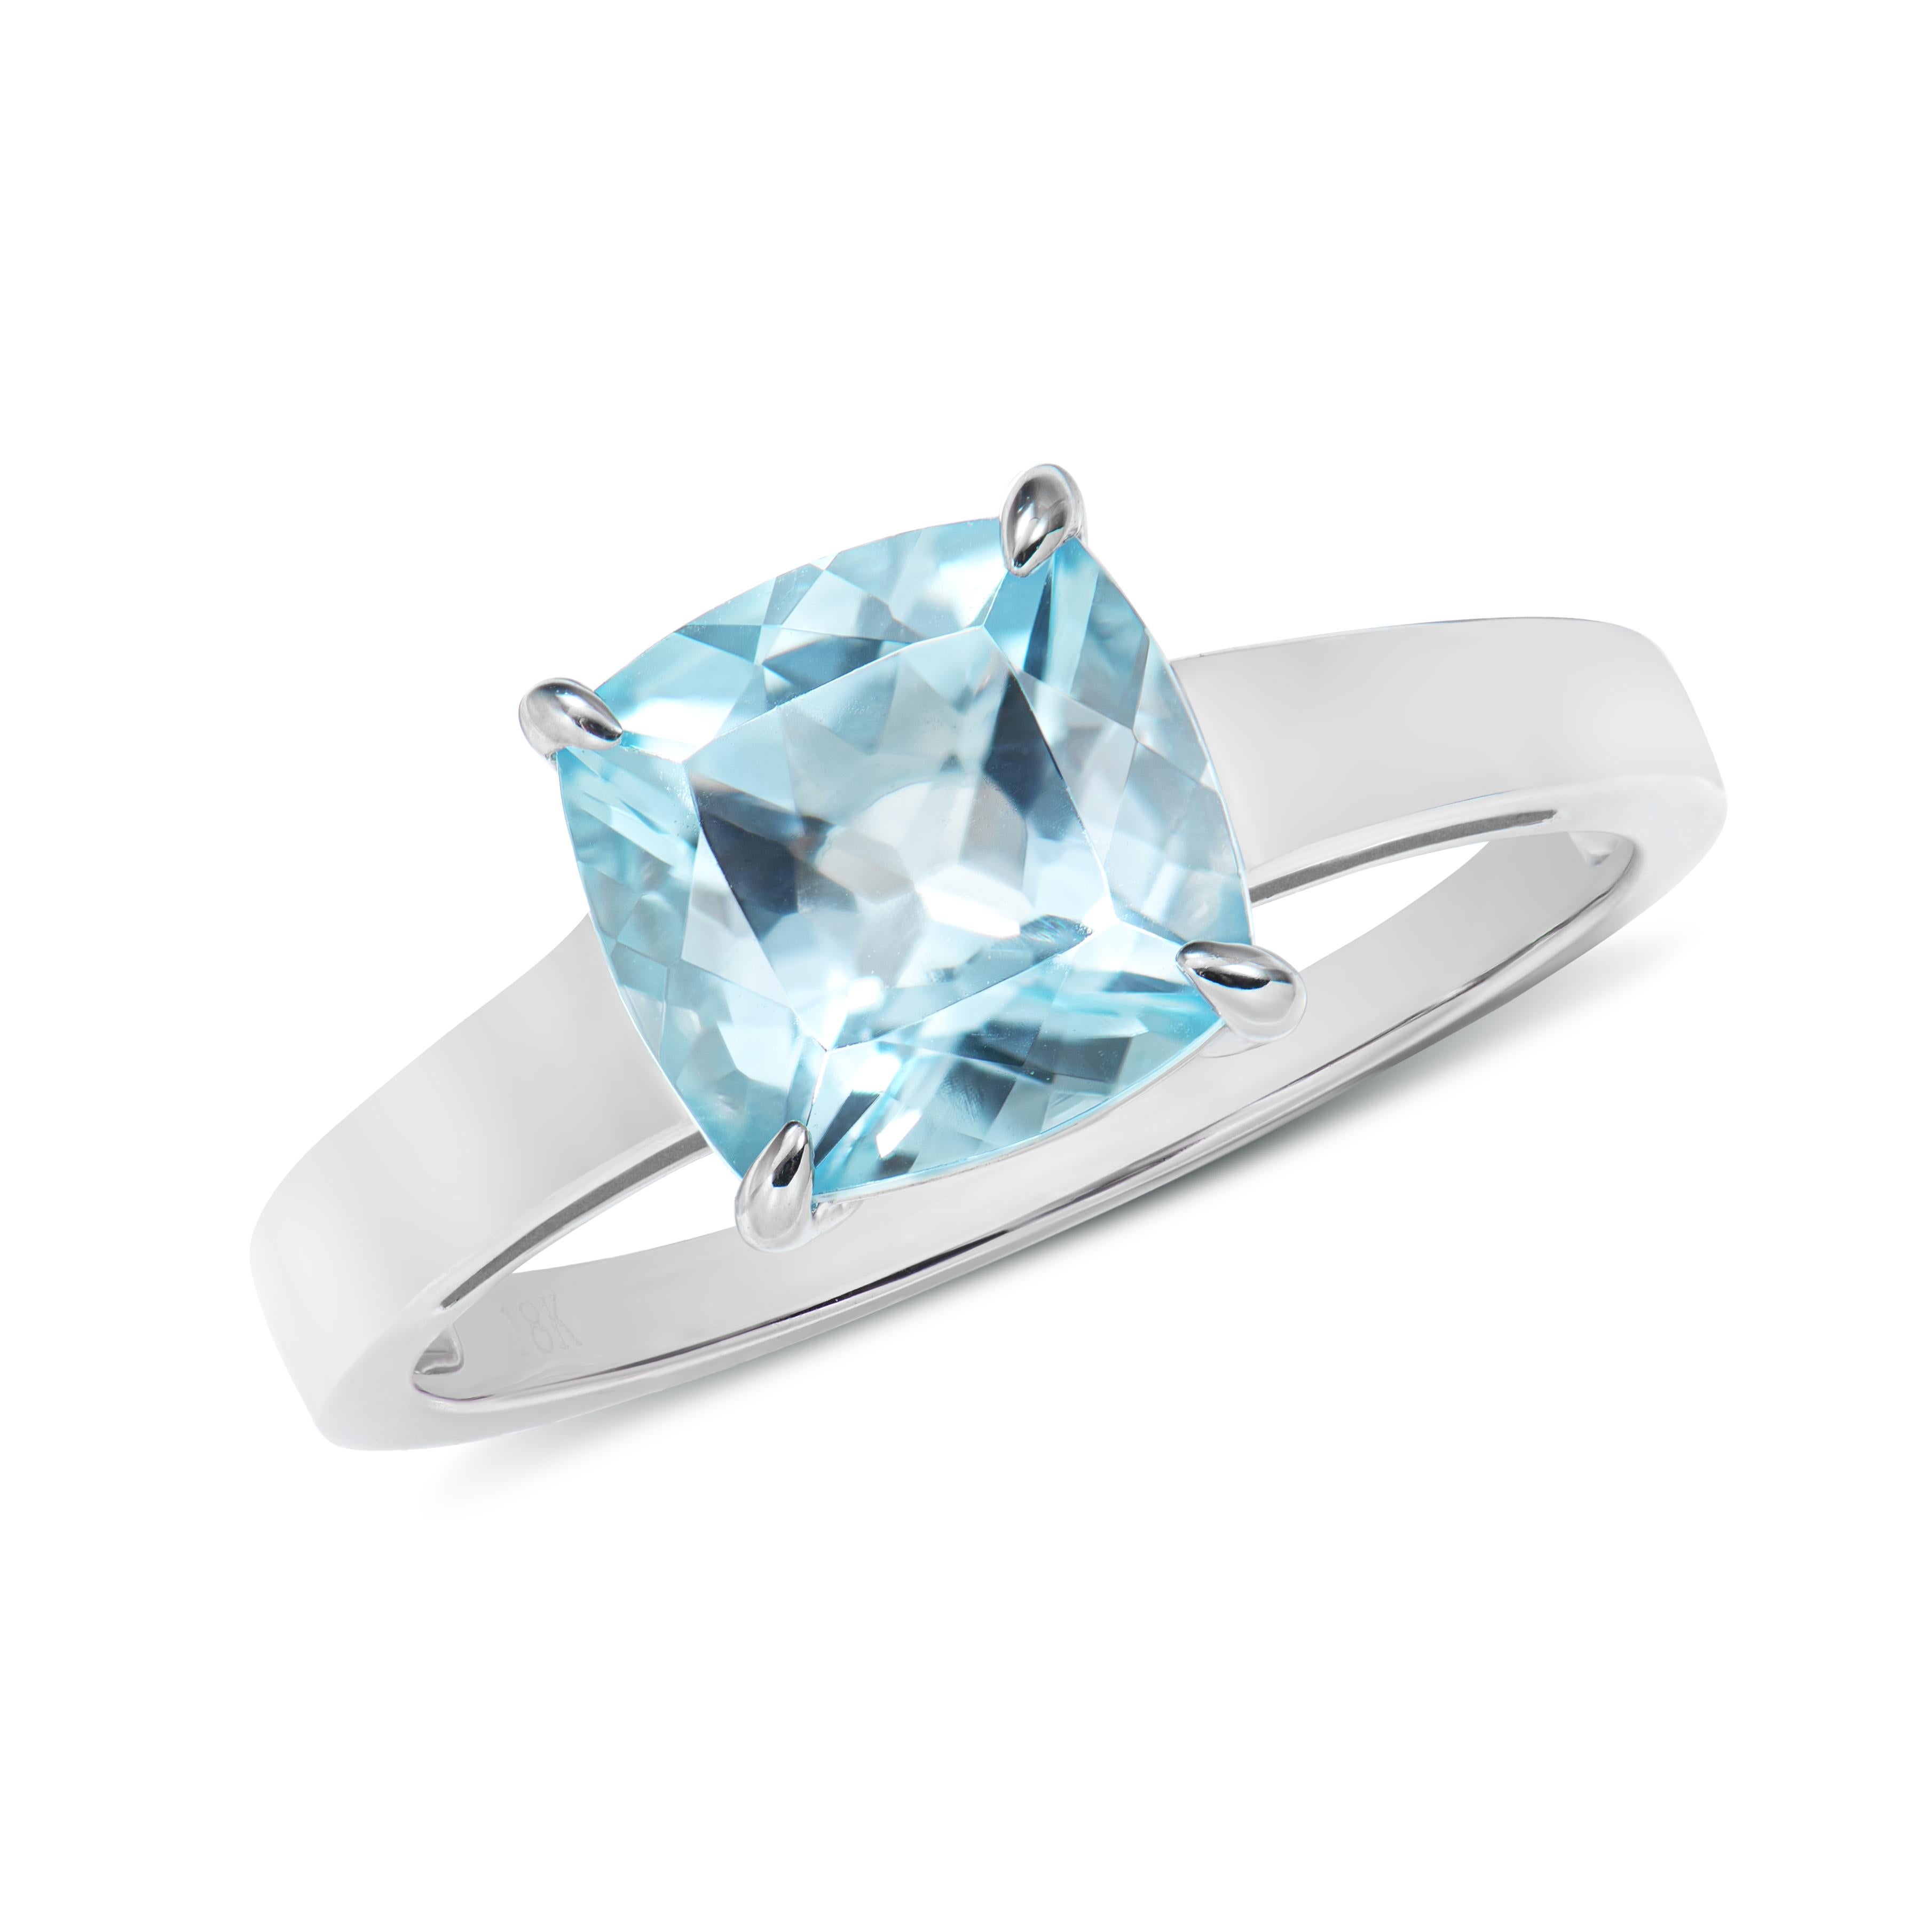 Presented A lovely collection of gems, including Amethyst, Sky Blue Topaz, and Swiss Blue Topaz and Morganite is perfect for people who value quality and want to wear it to any occasion or celebration. The white gold swiss blue topaz ring offer a